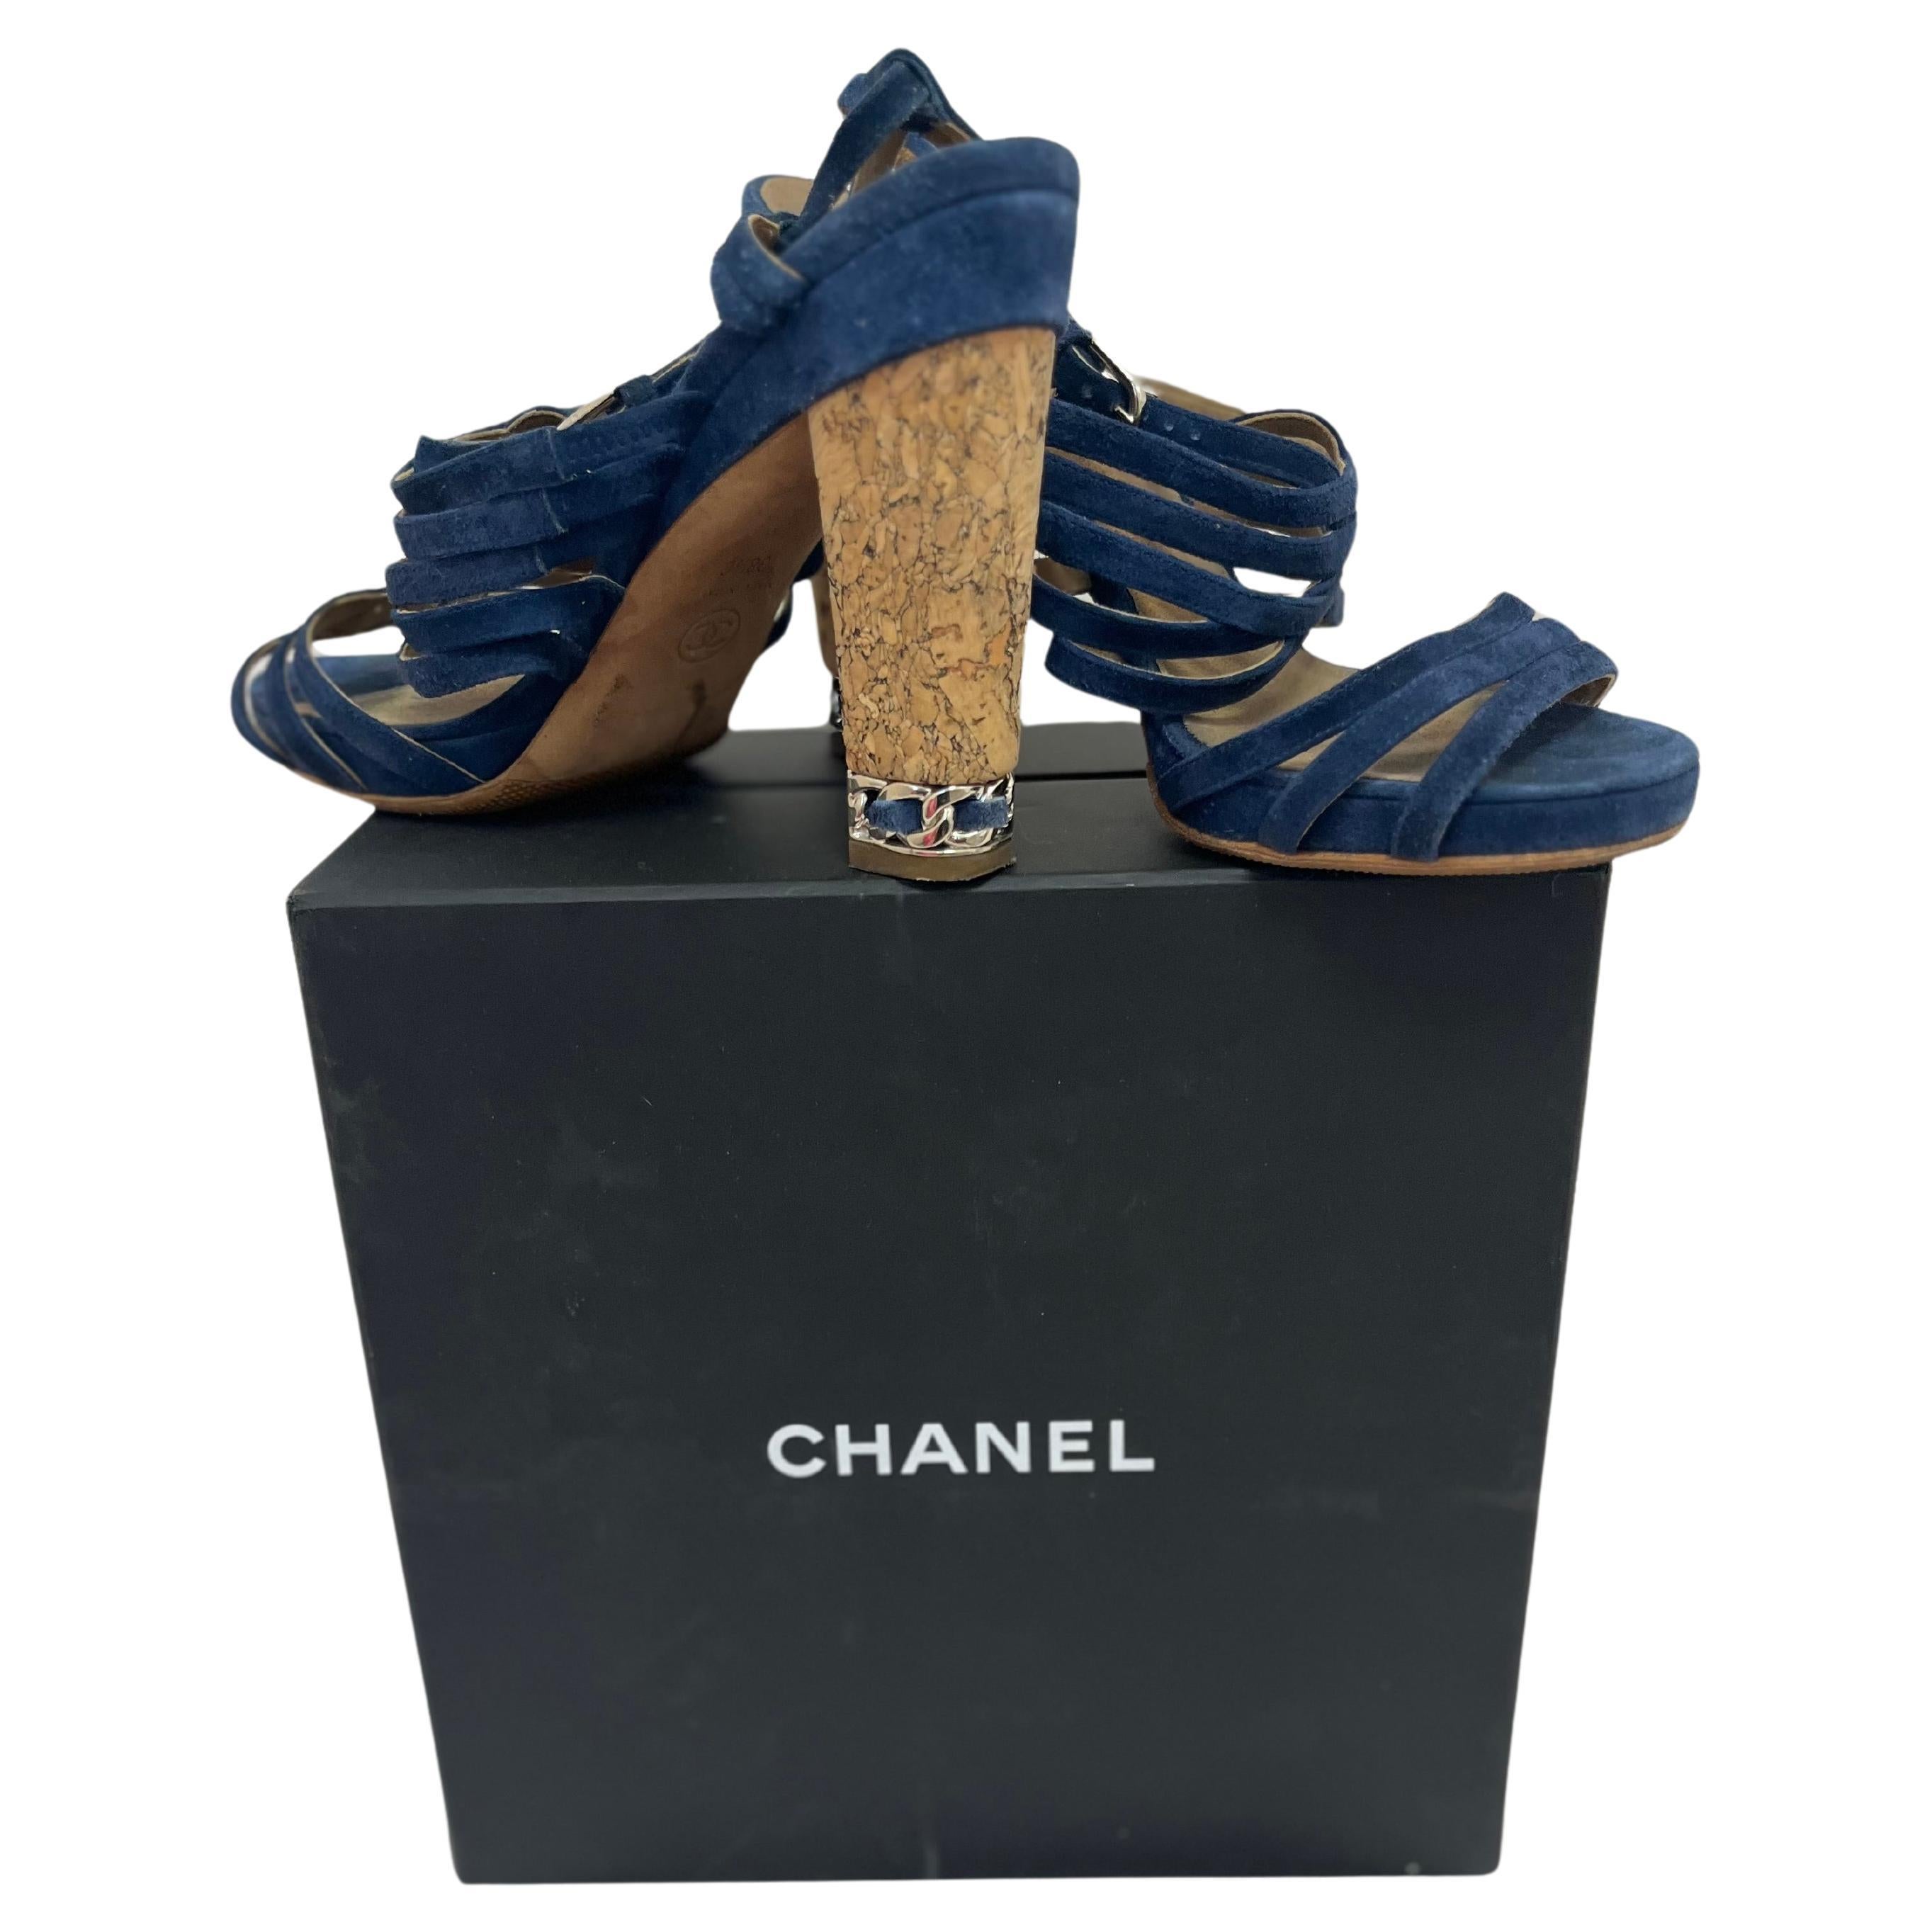 Chanel Blue Suede Shoes 38.5 w/Box